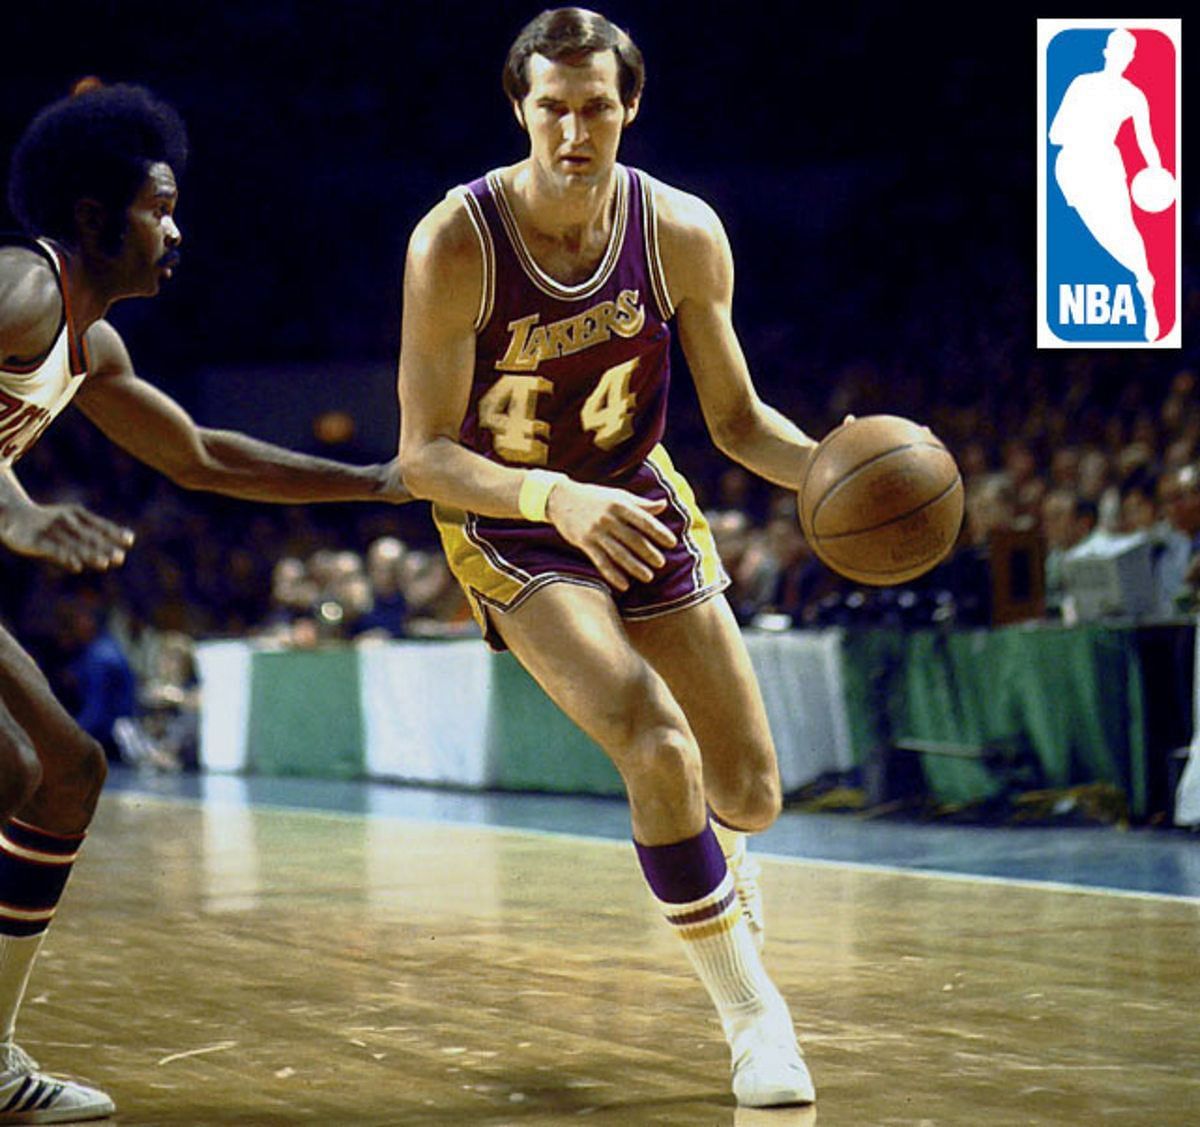 Jerry West for the Lakers